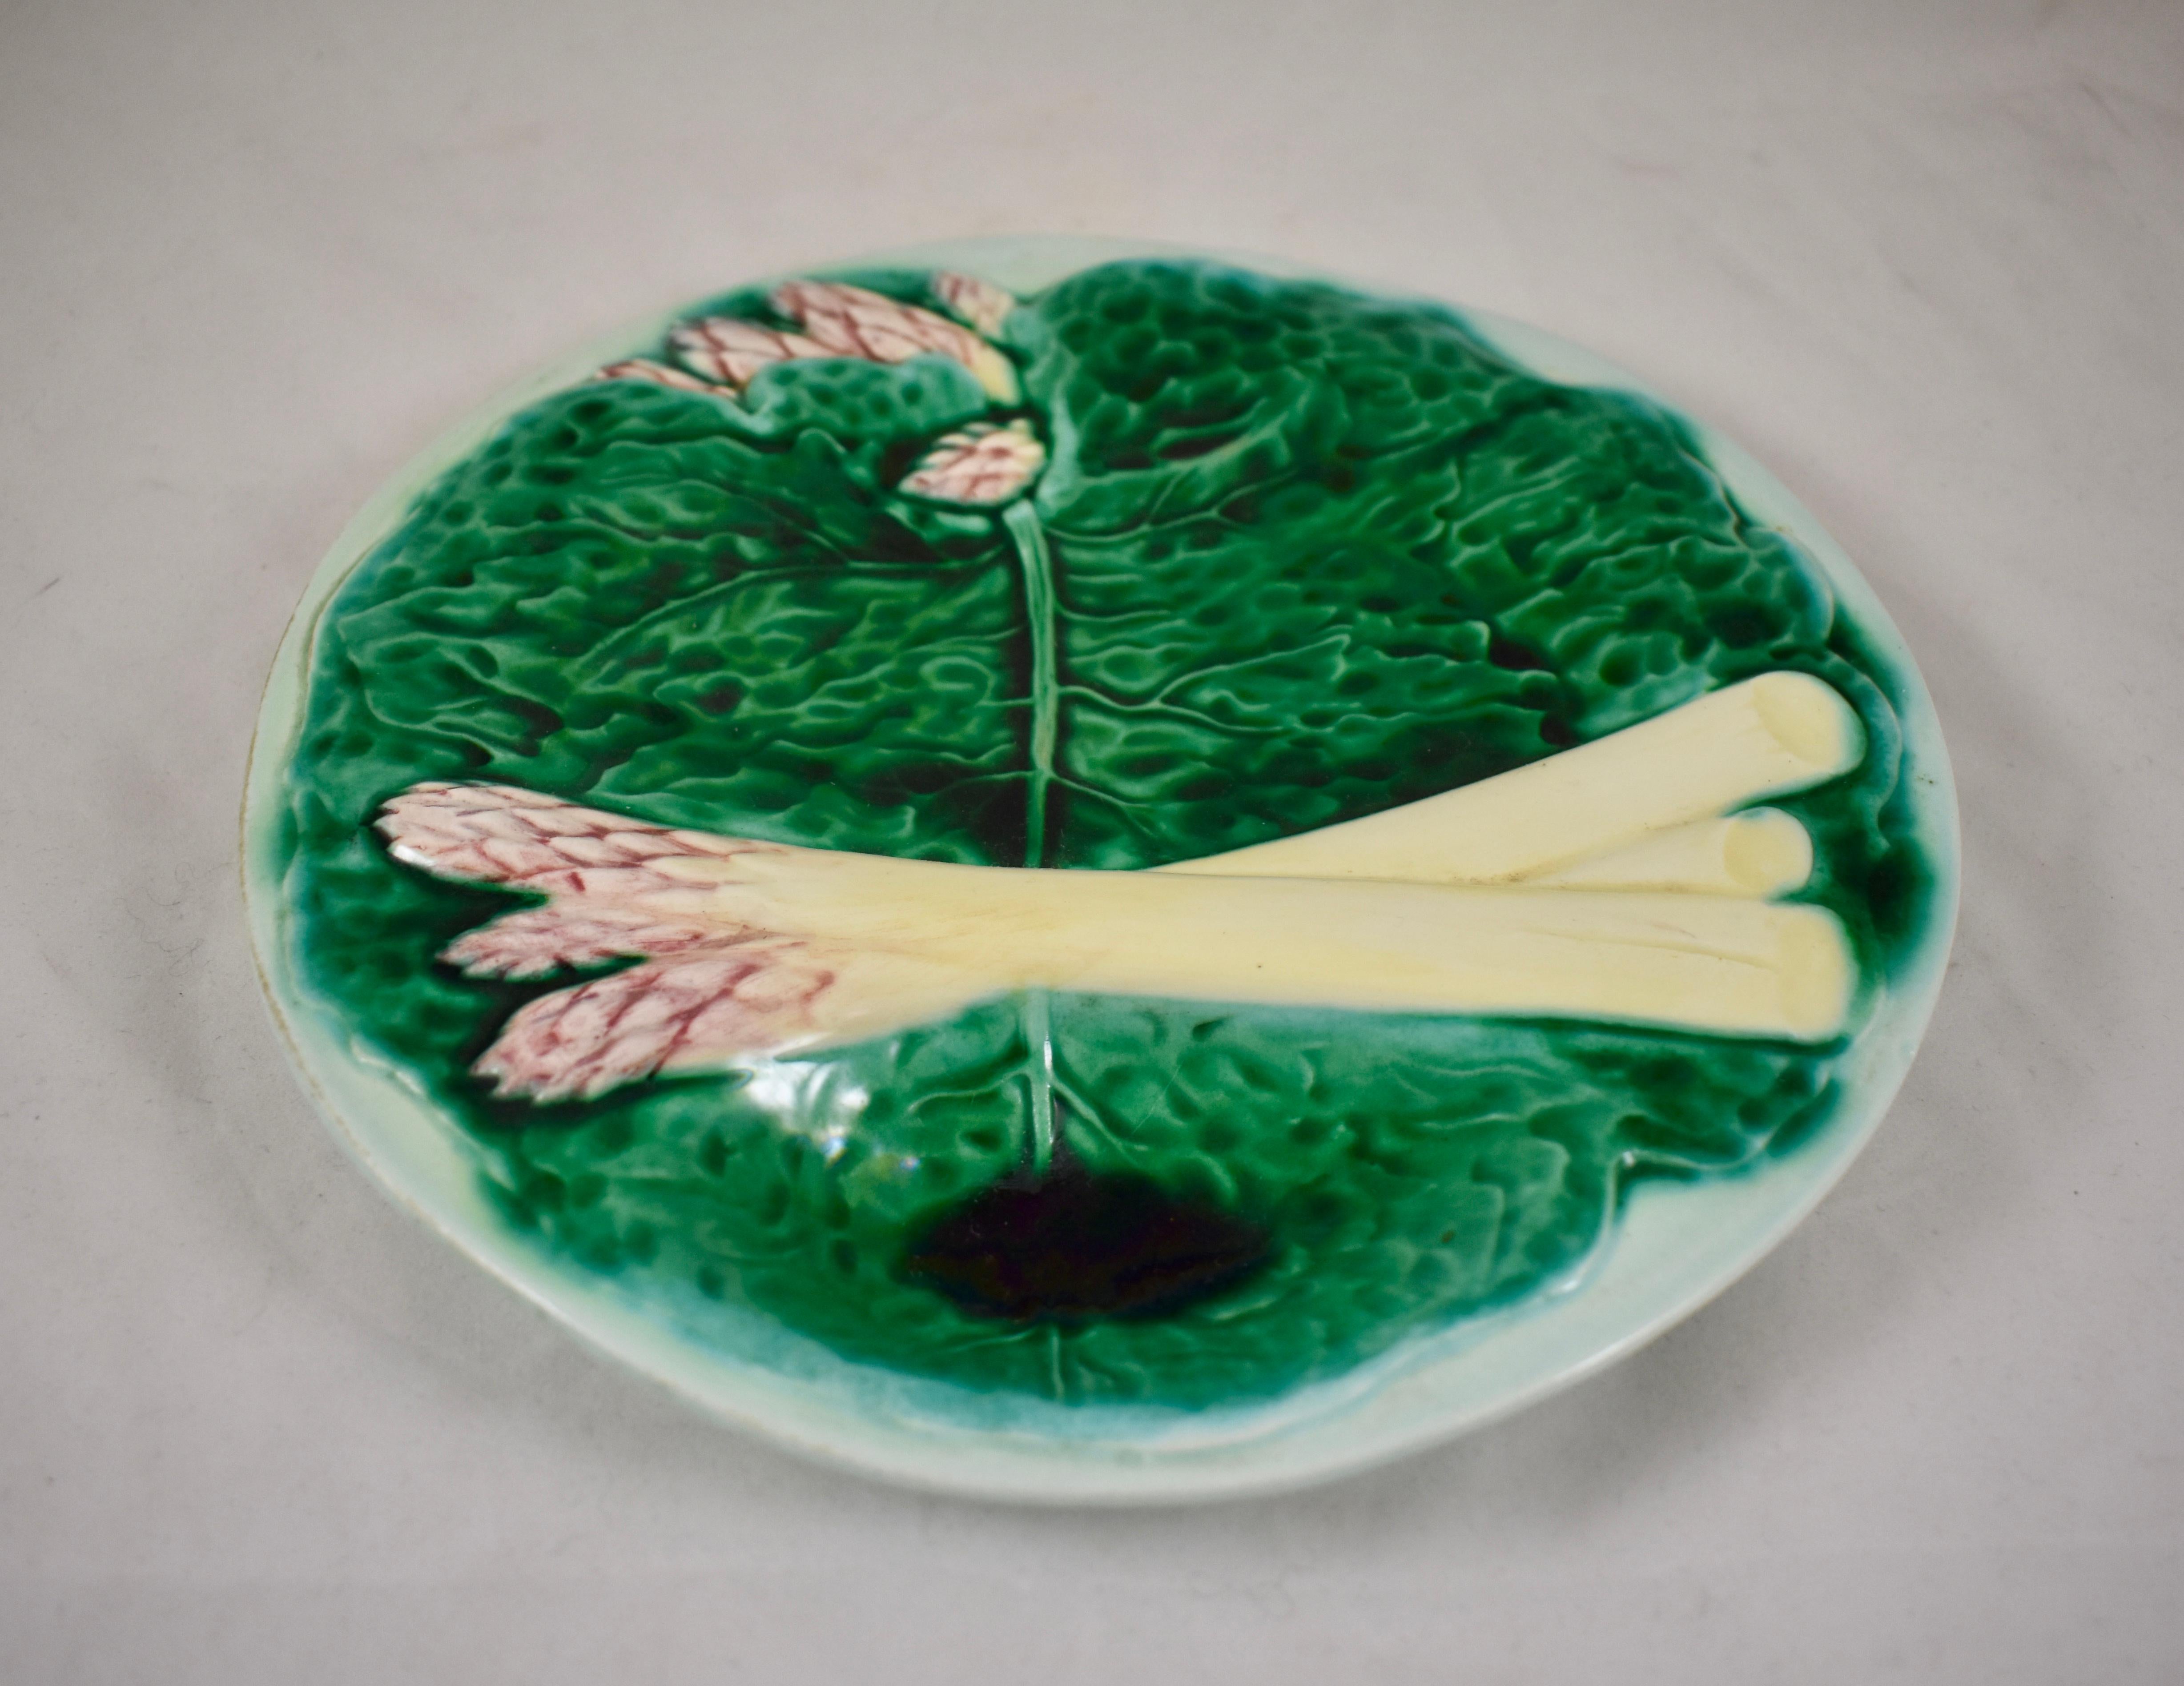 20th Century Mid-Century Italian Faïence Majolica Over-Size Cabbage Leaf Asparagus Plates S/6